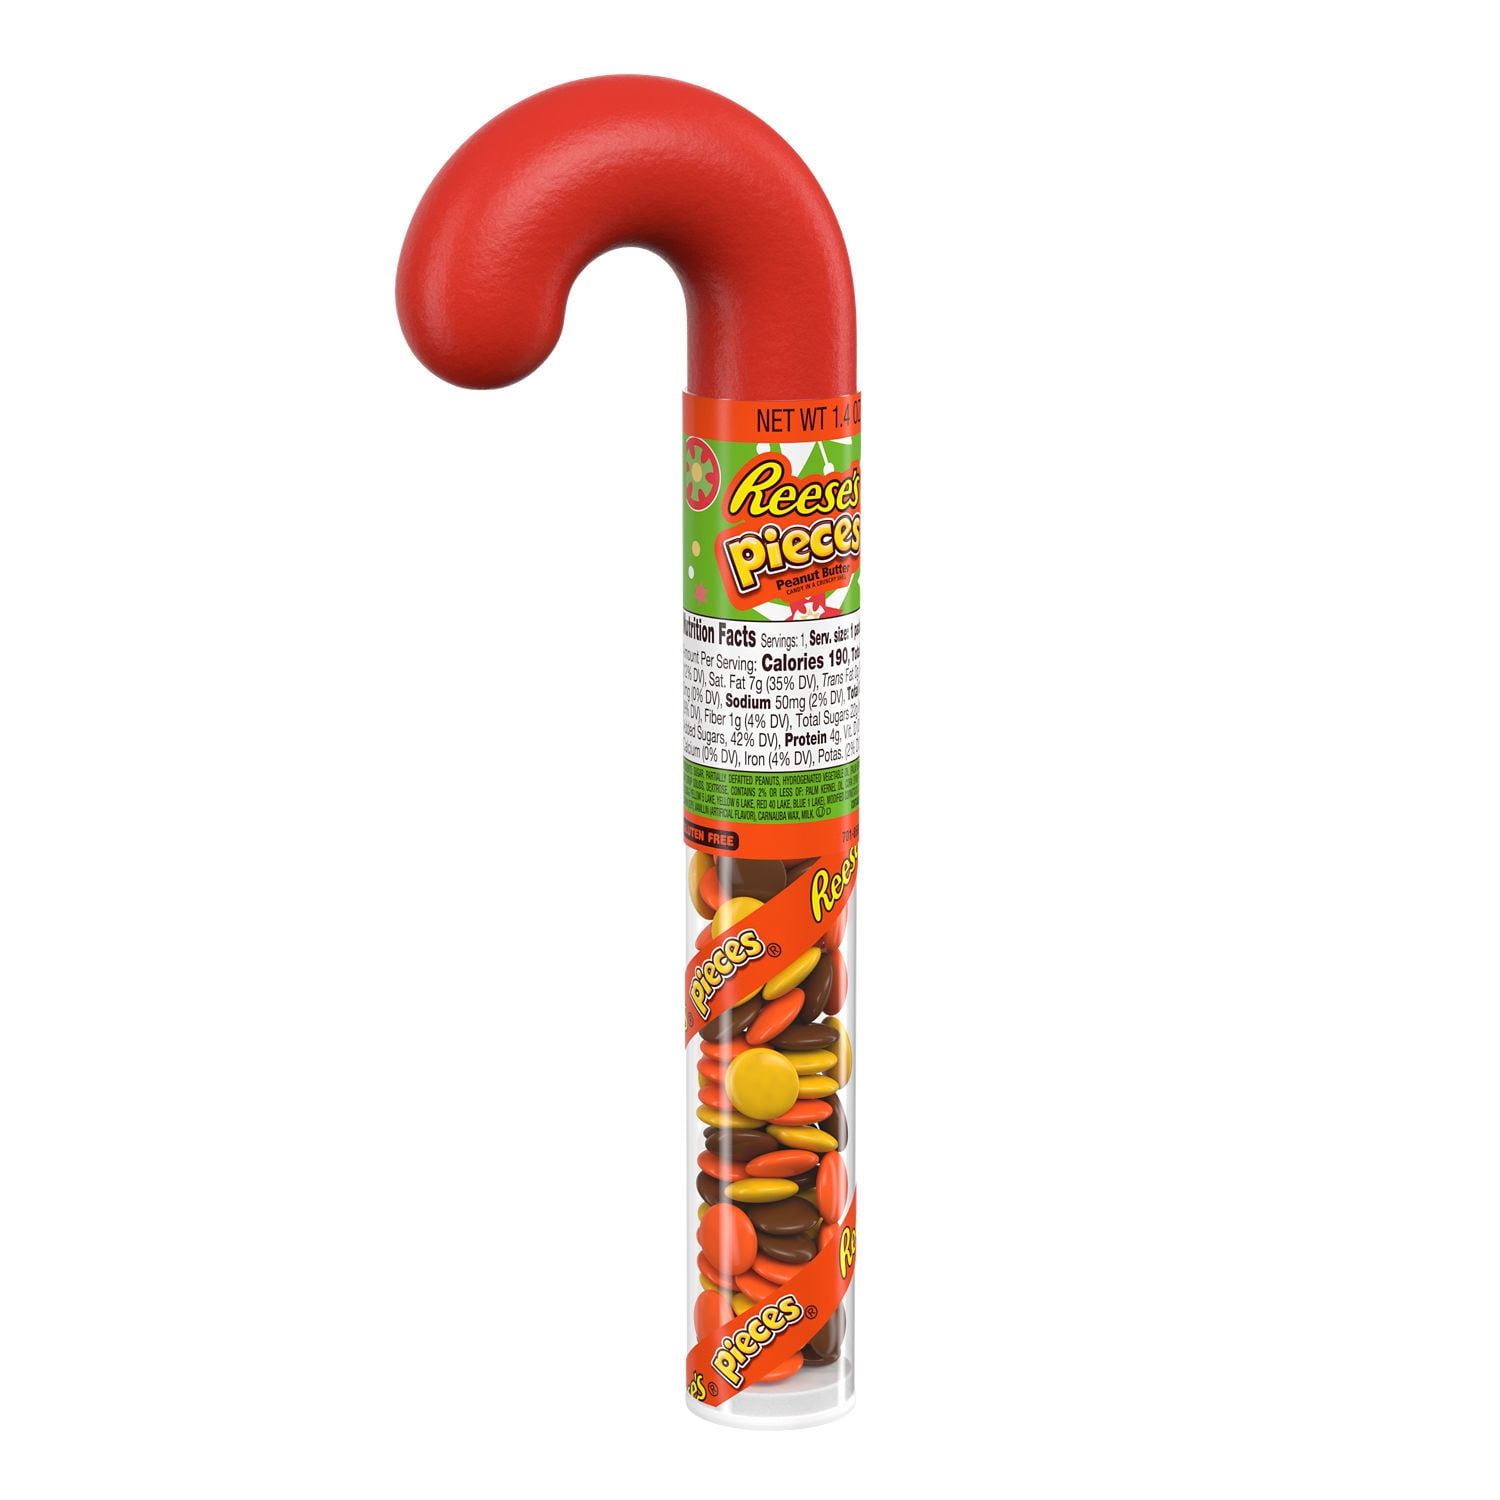 REESE'S, PIECES Peanut Butter in a Crunchy Shell Candy, Christmas, 1.4 oz, Filled Candy Cane